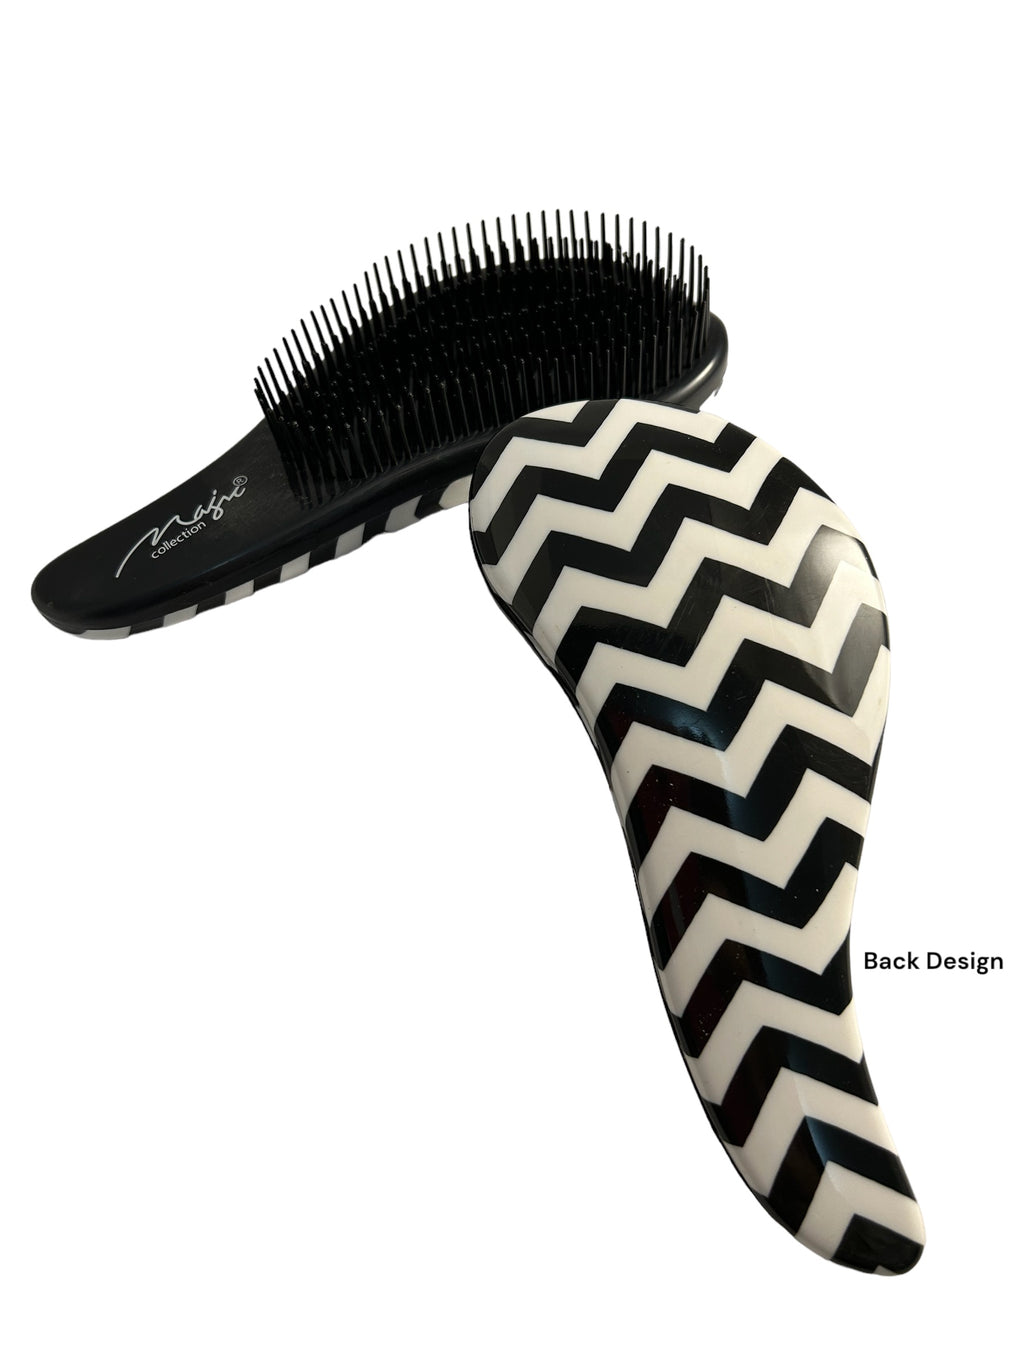 No knot-hair tamer, gently smoothen tangle and knots with easy grip. 